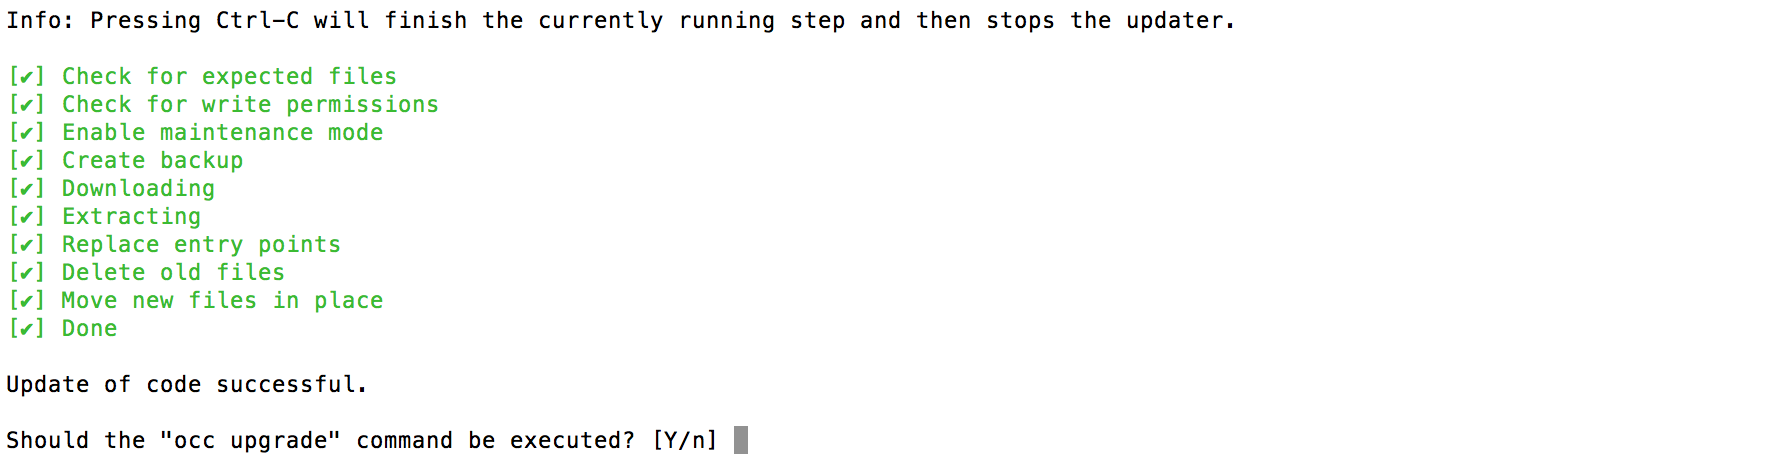 ../_images/updater-cli-6-run-command.png